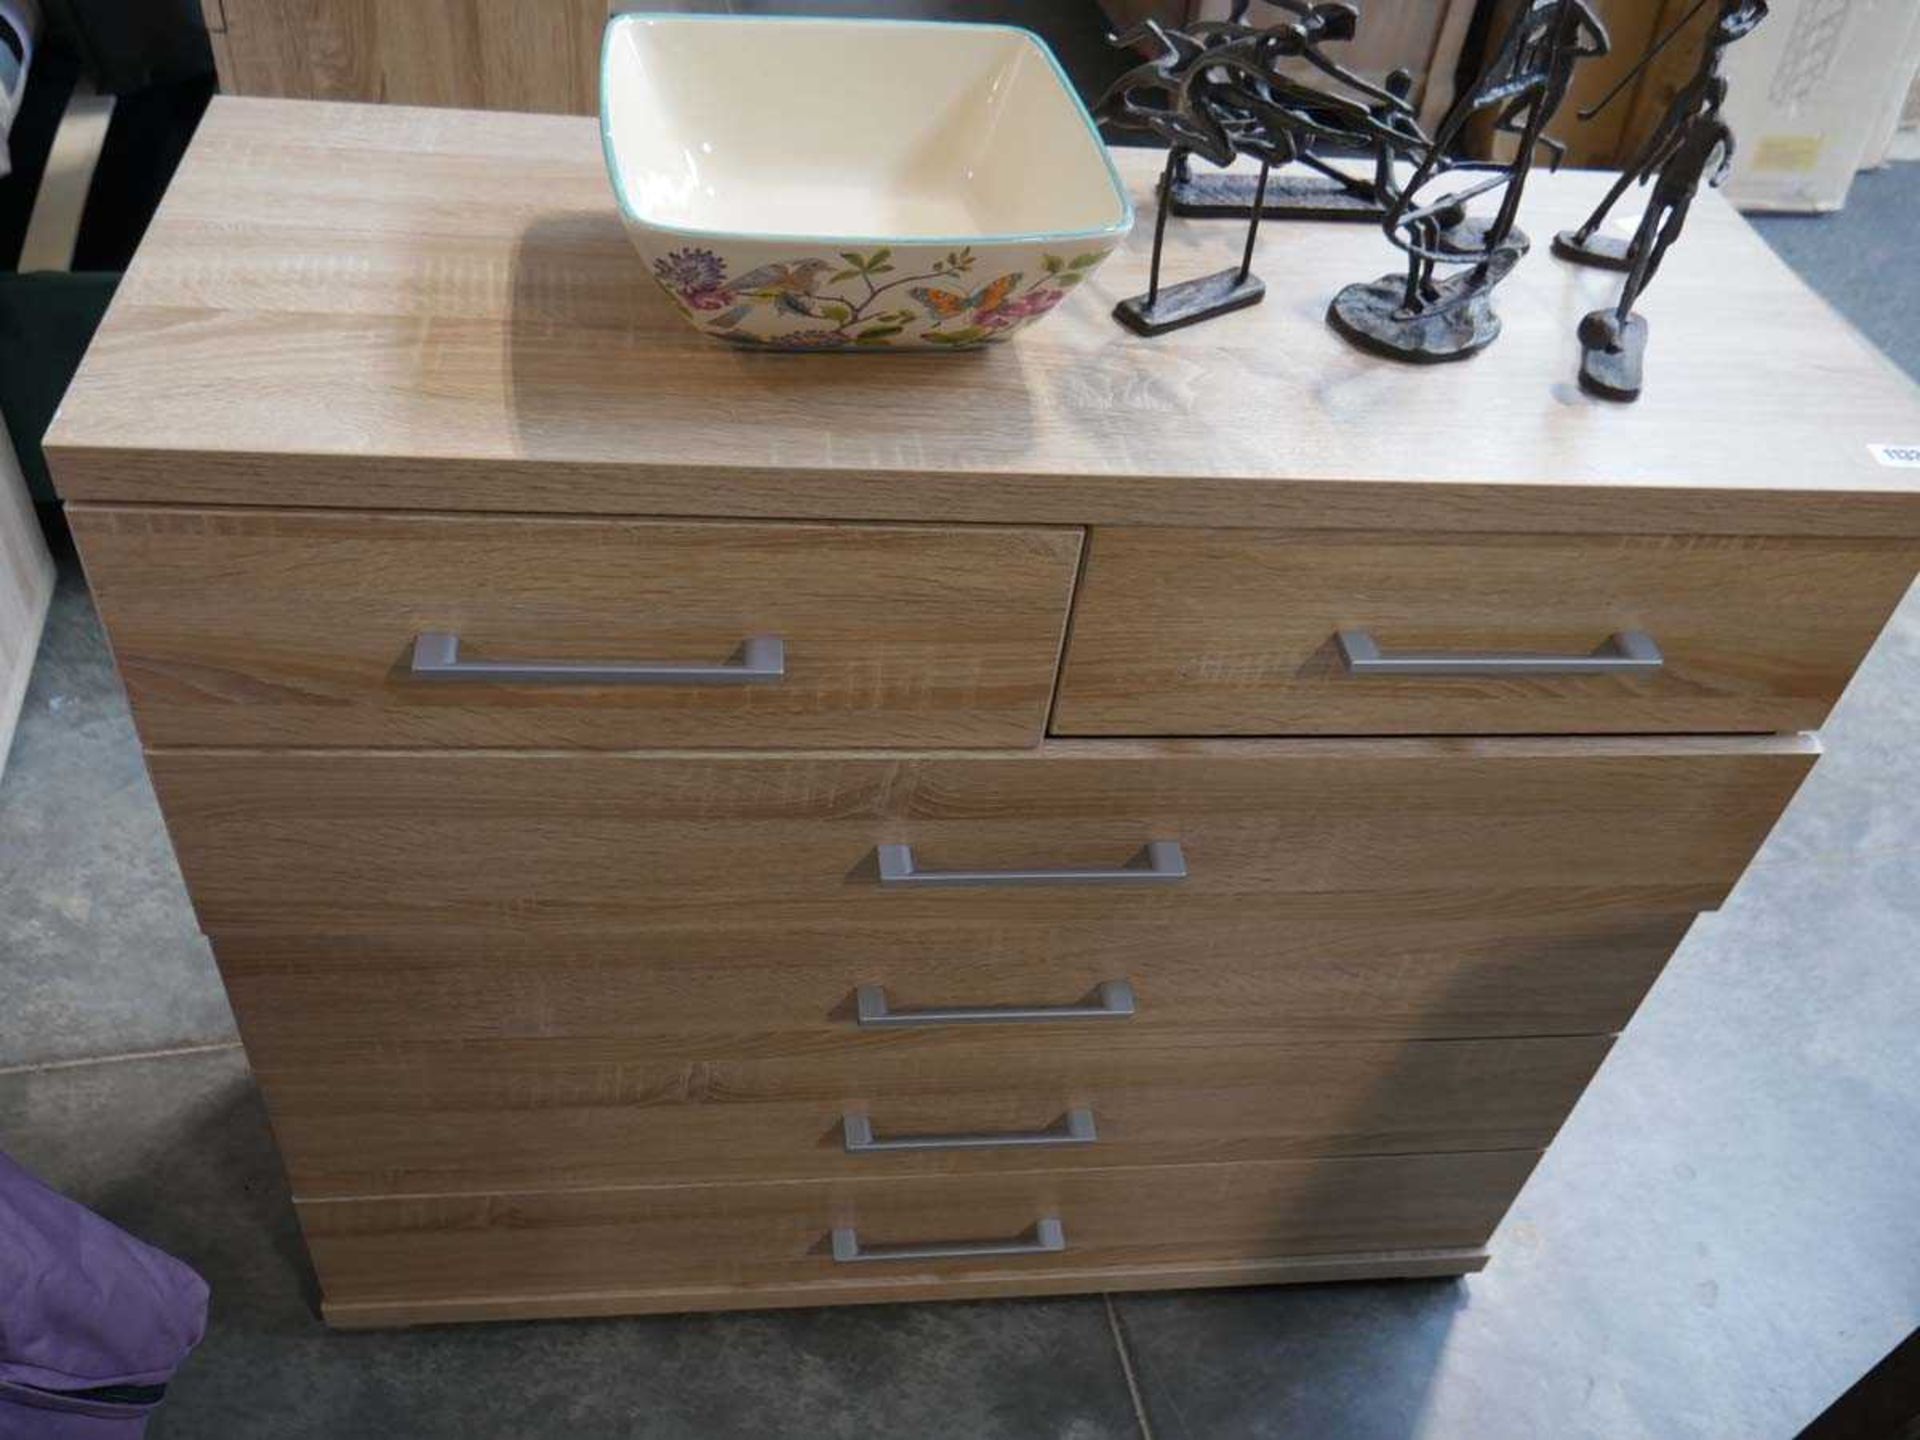 Ash finish bedroom suite comprising chest of 2 over 4 drawer, 5 drawer tall boy and 3 drawer